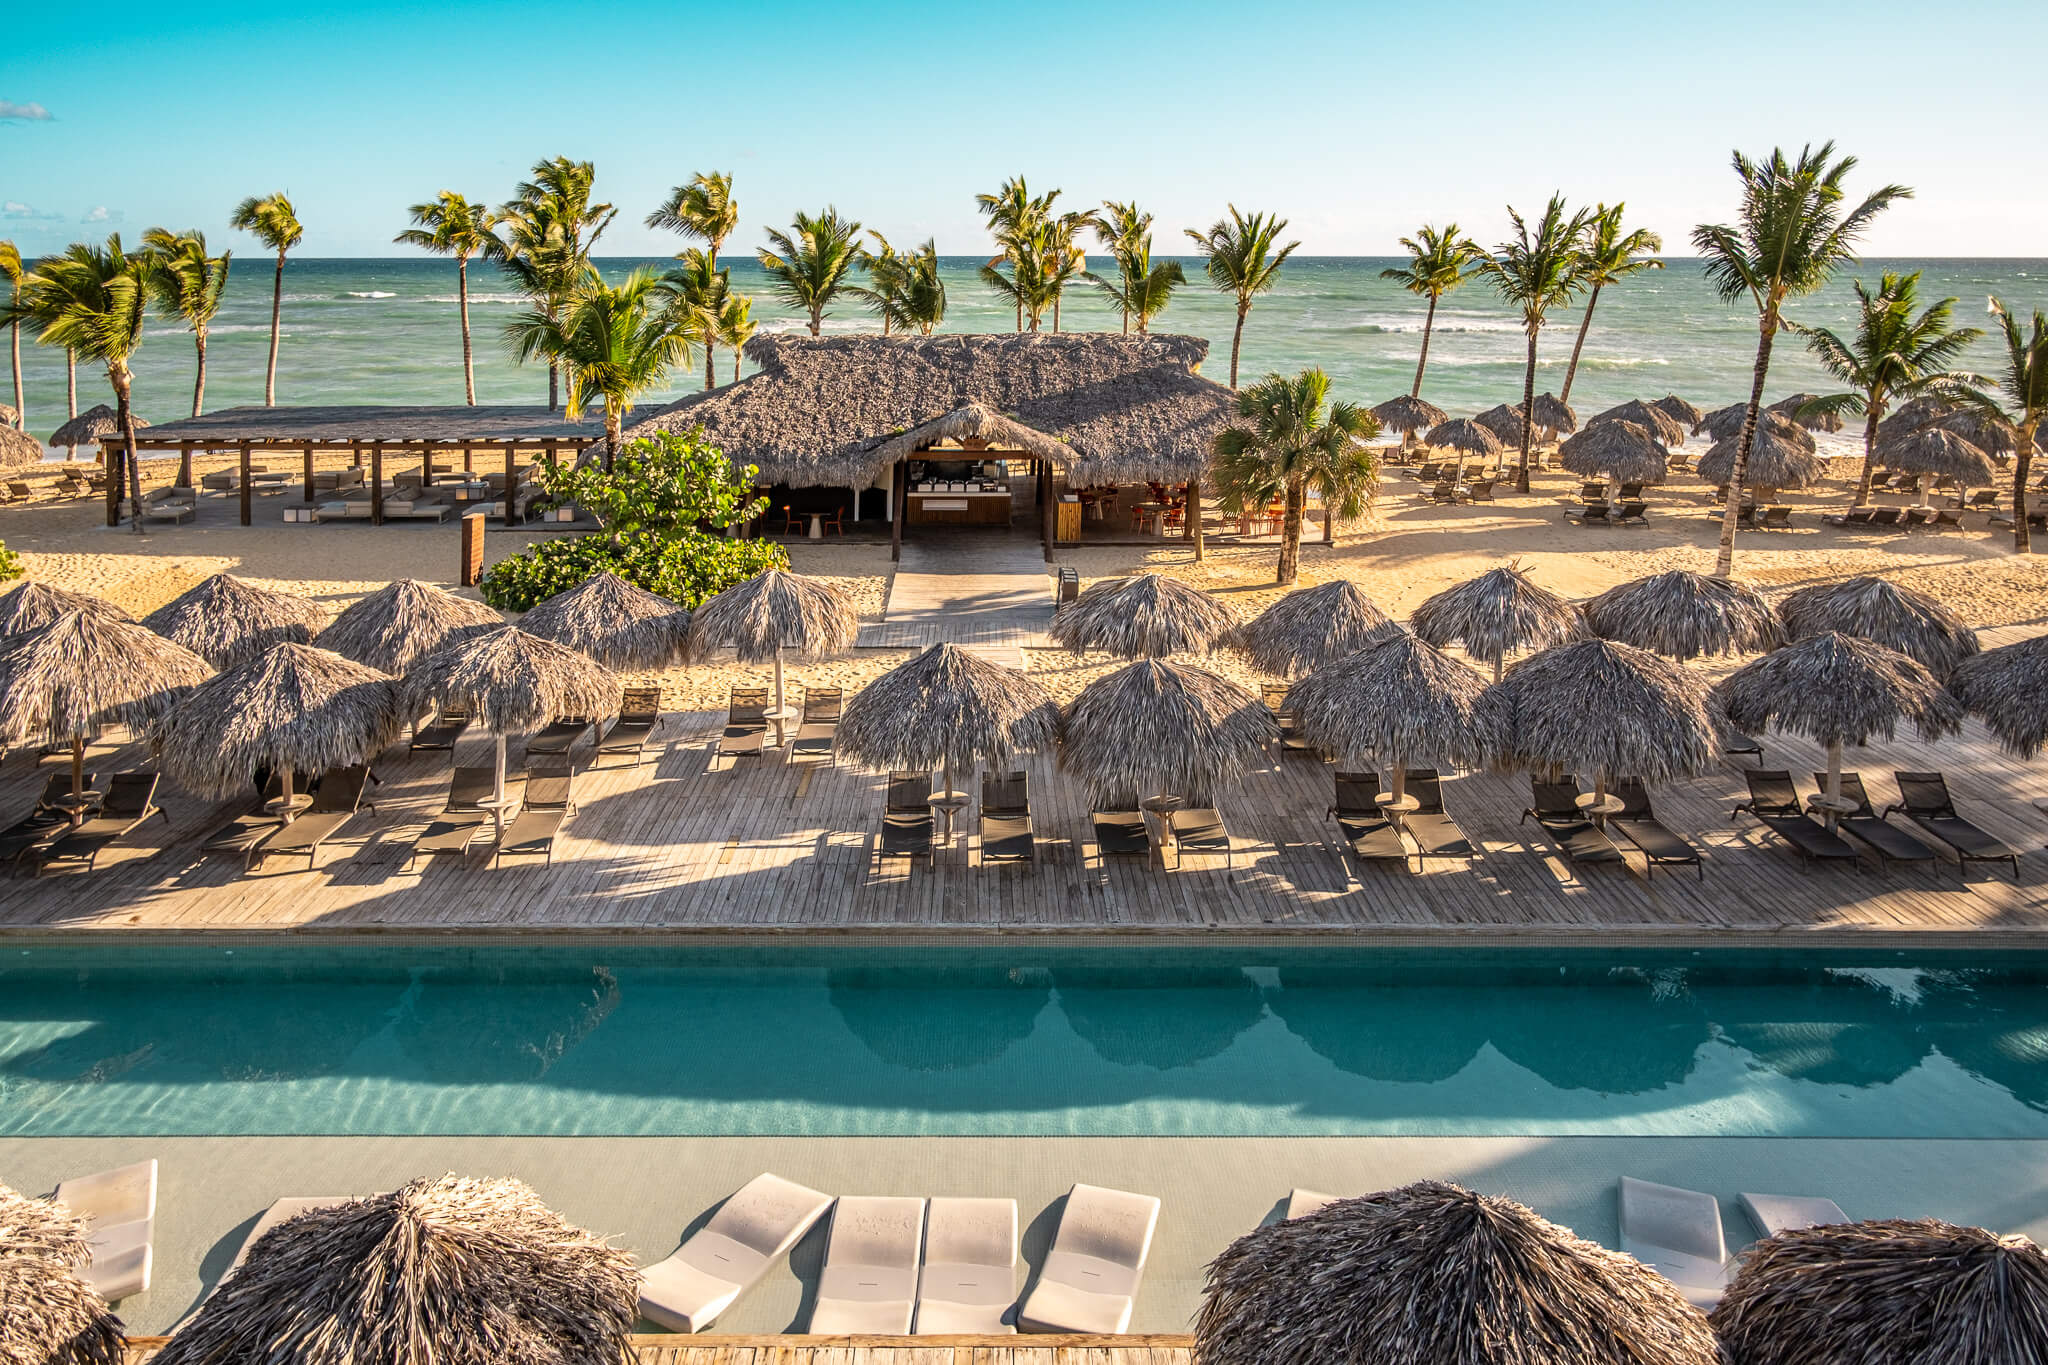 The activity pool overlook the beach at Excellence El Carmen in Punta Cana